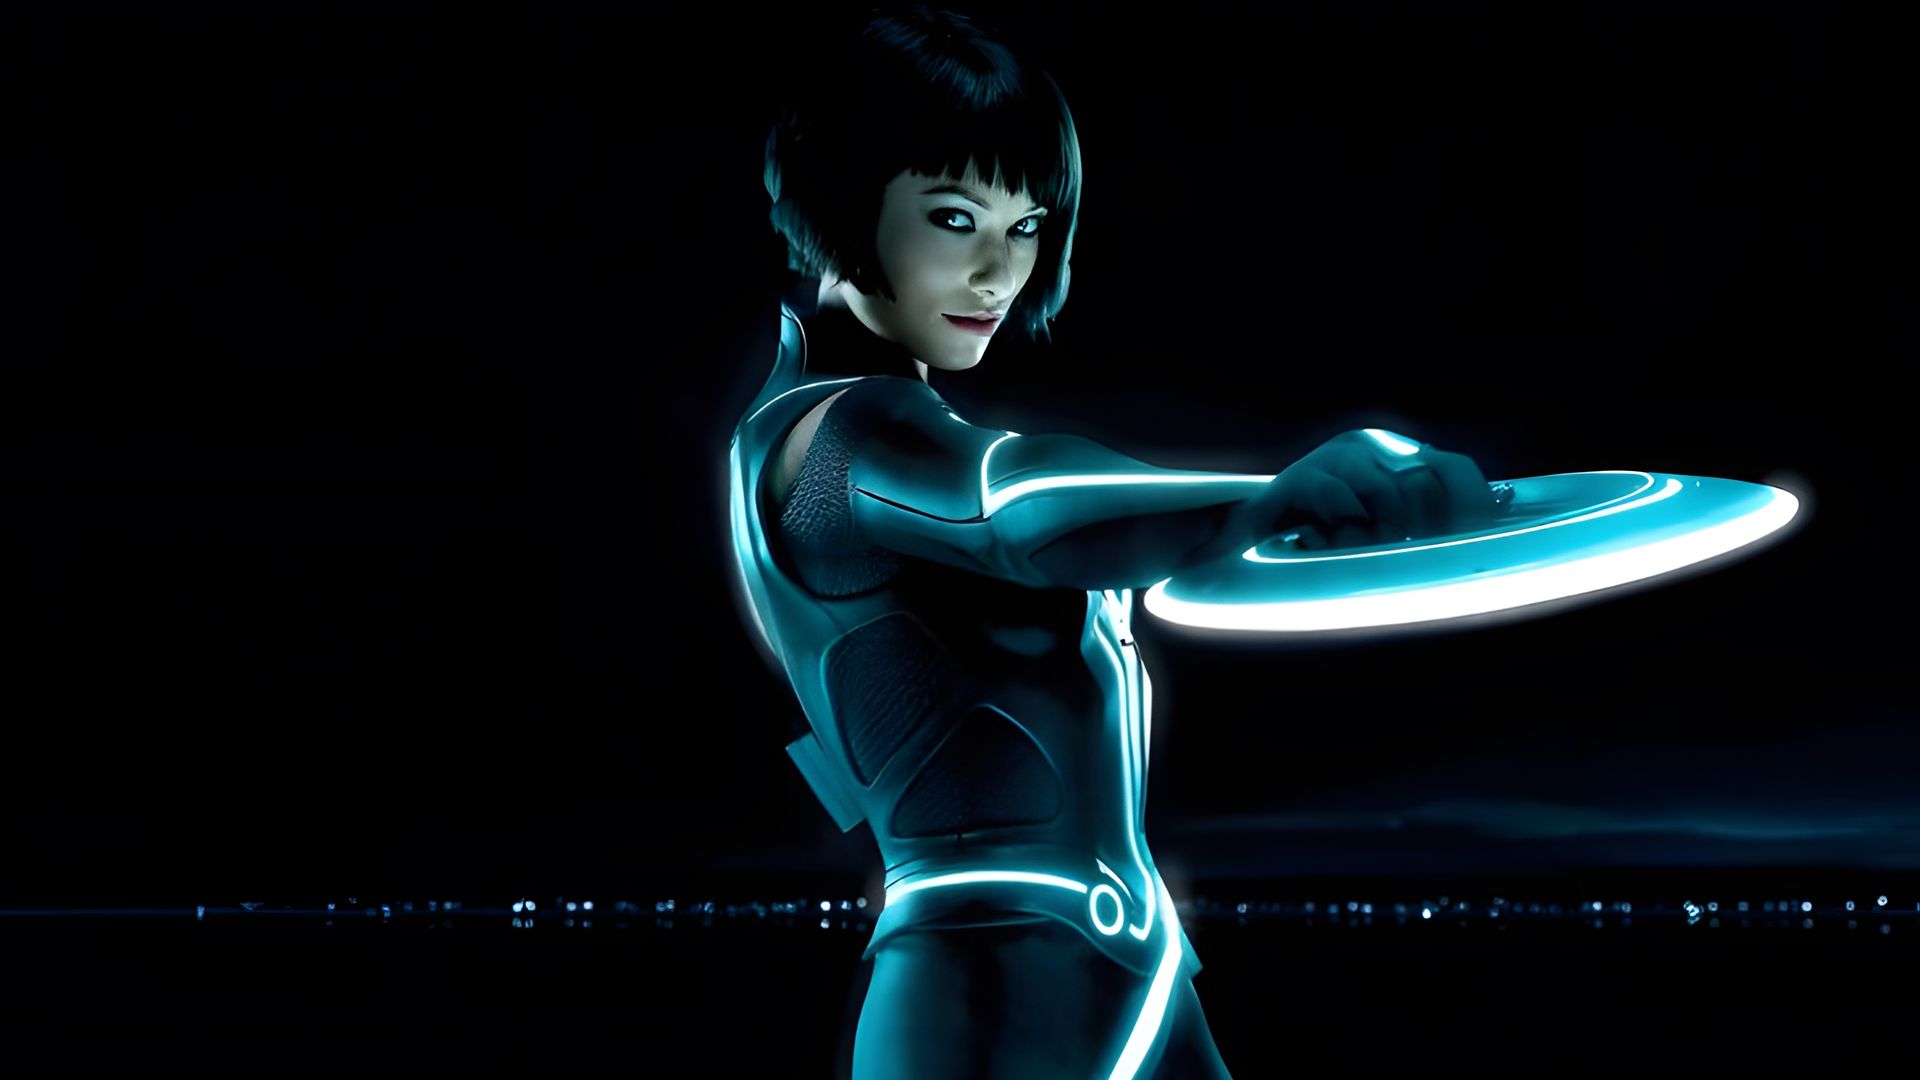 Olivia Wilde as Quorra from Tron